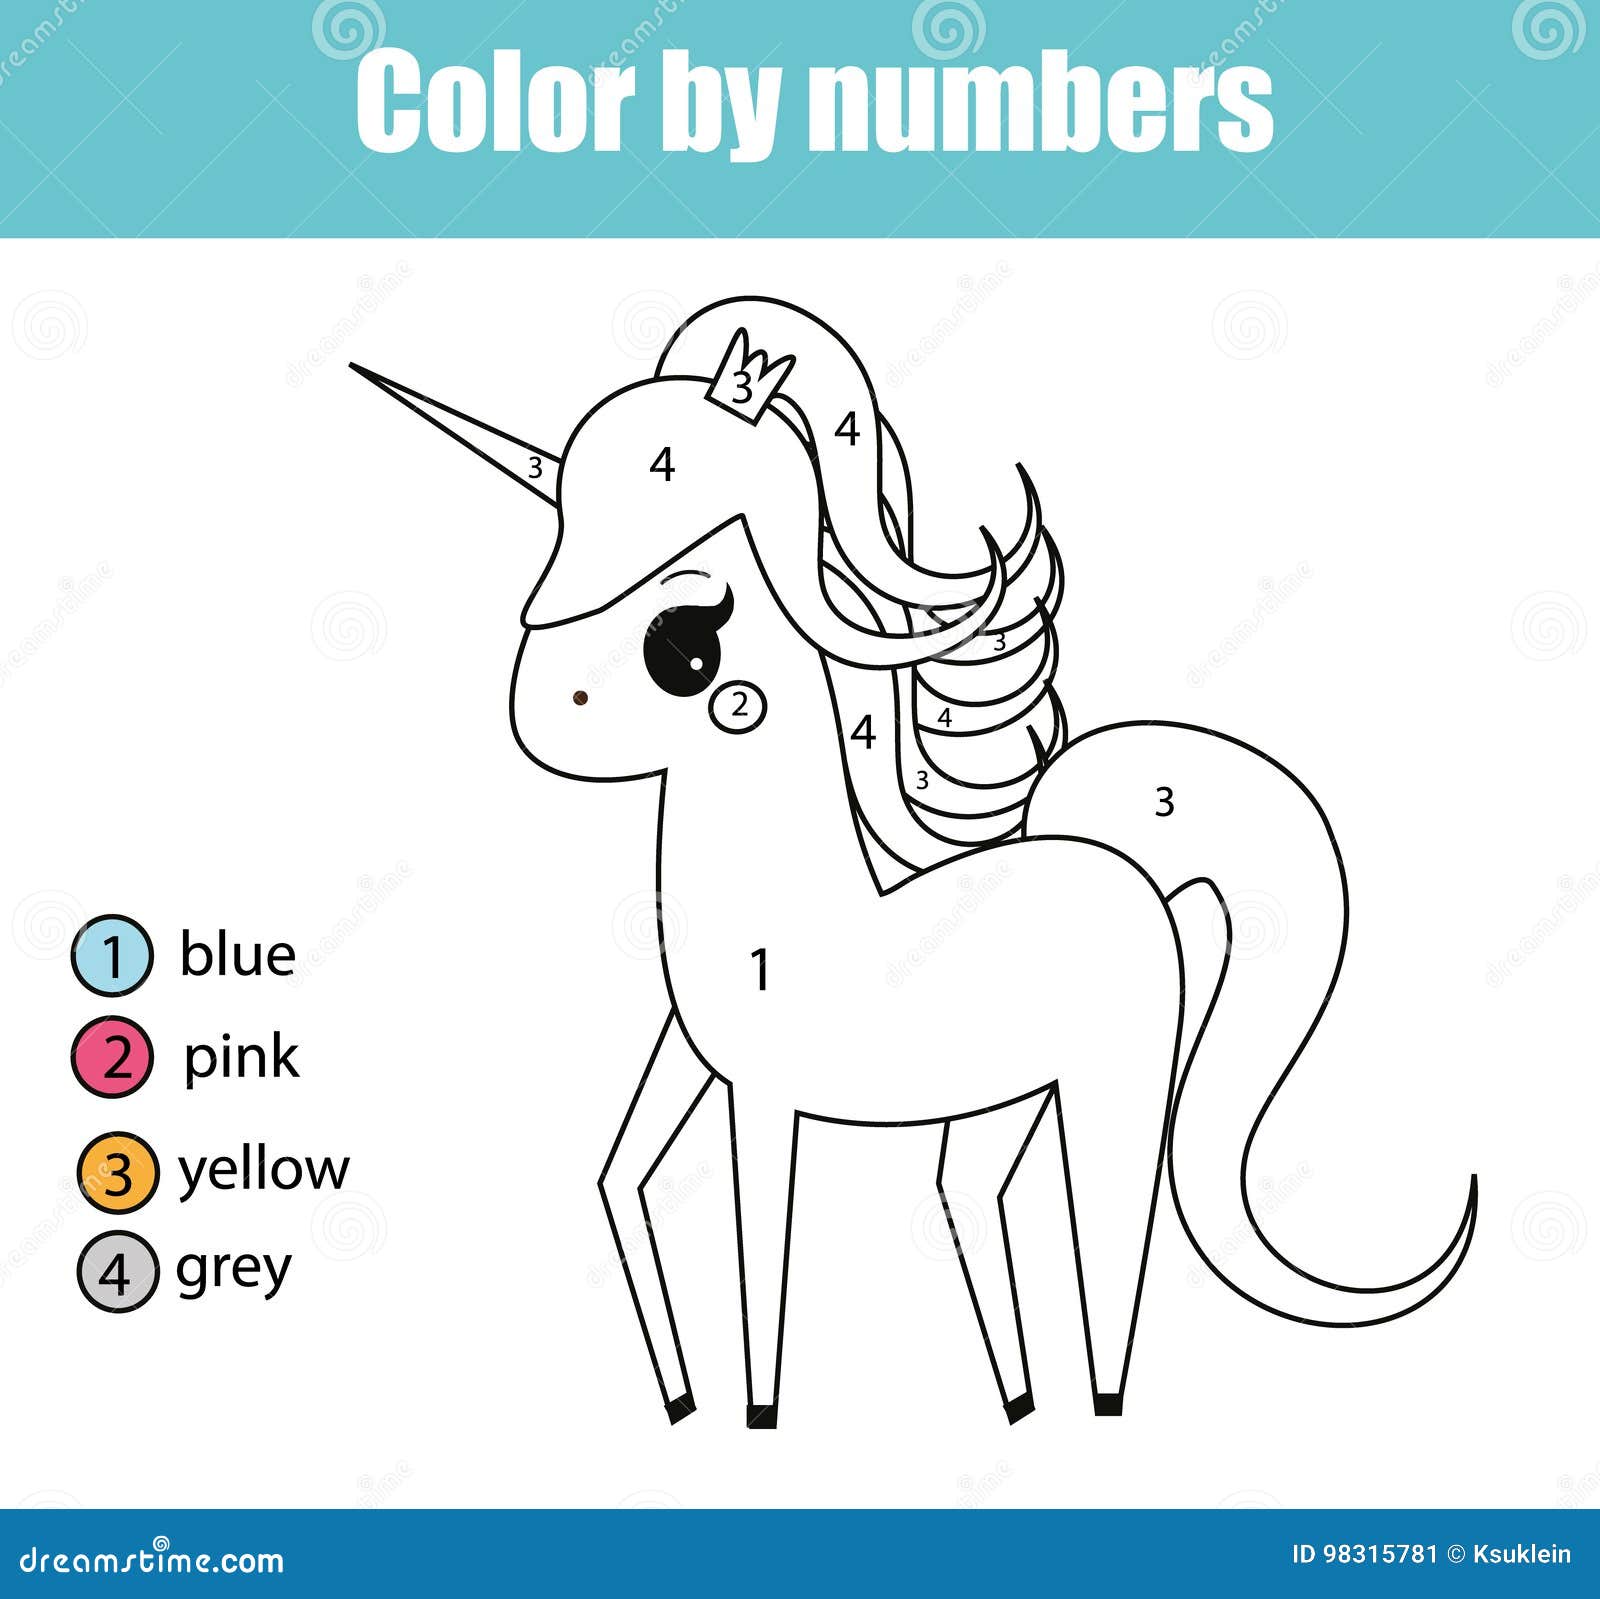 Coloring Page With Unicorn Character. Color By Numbers ...